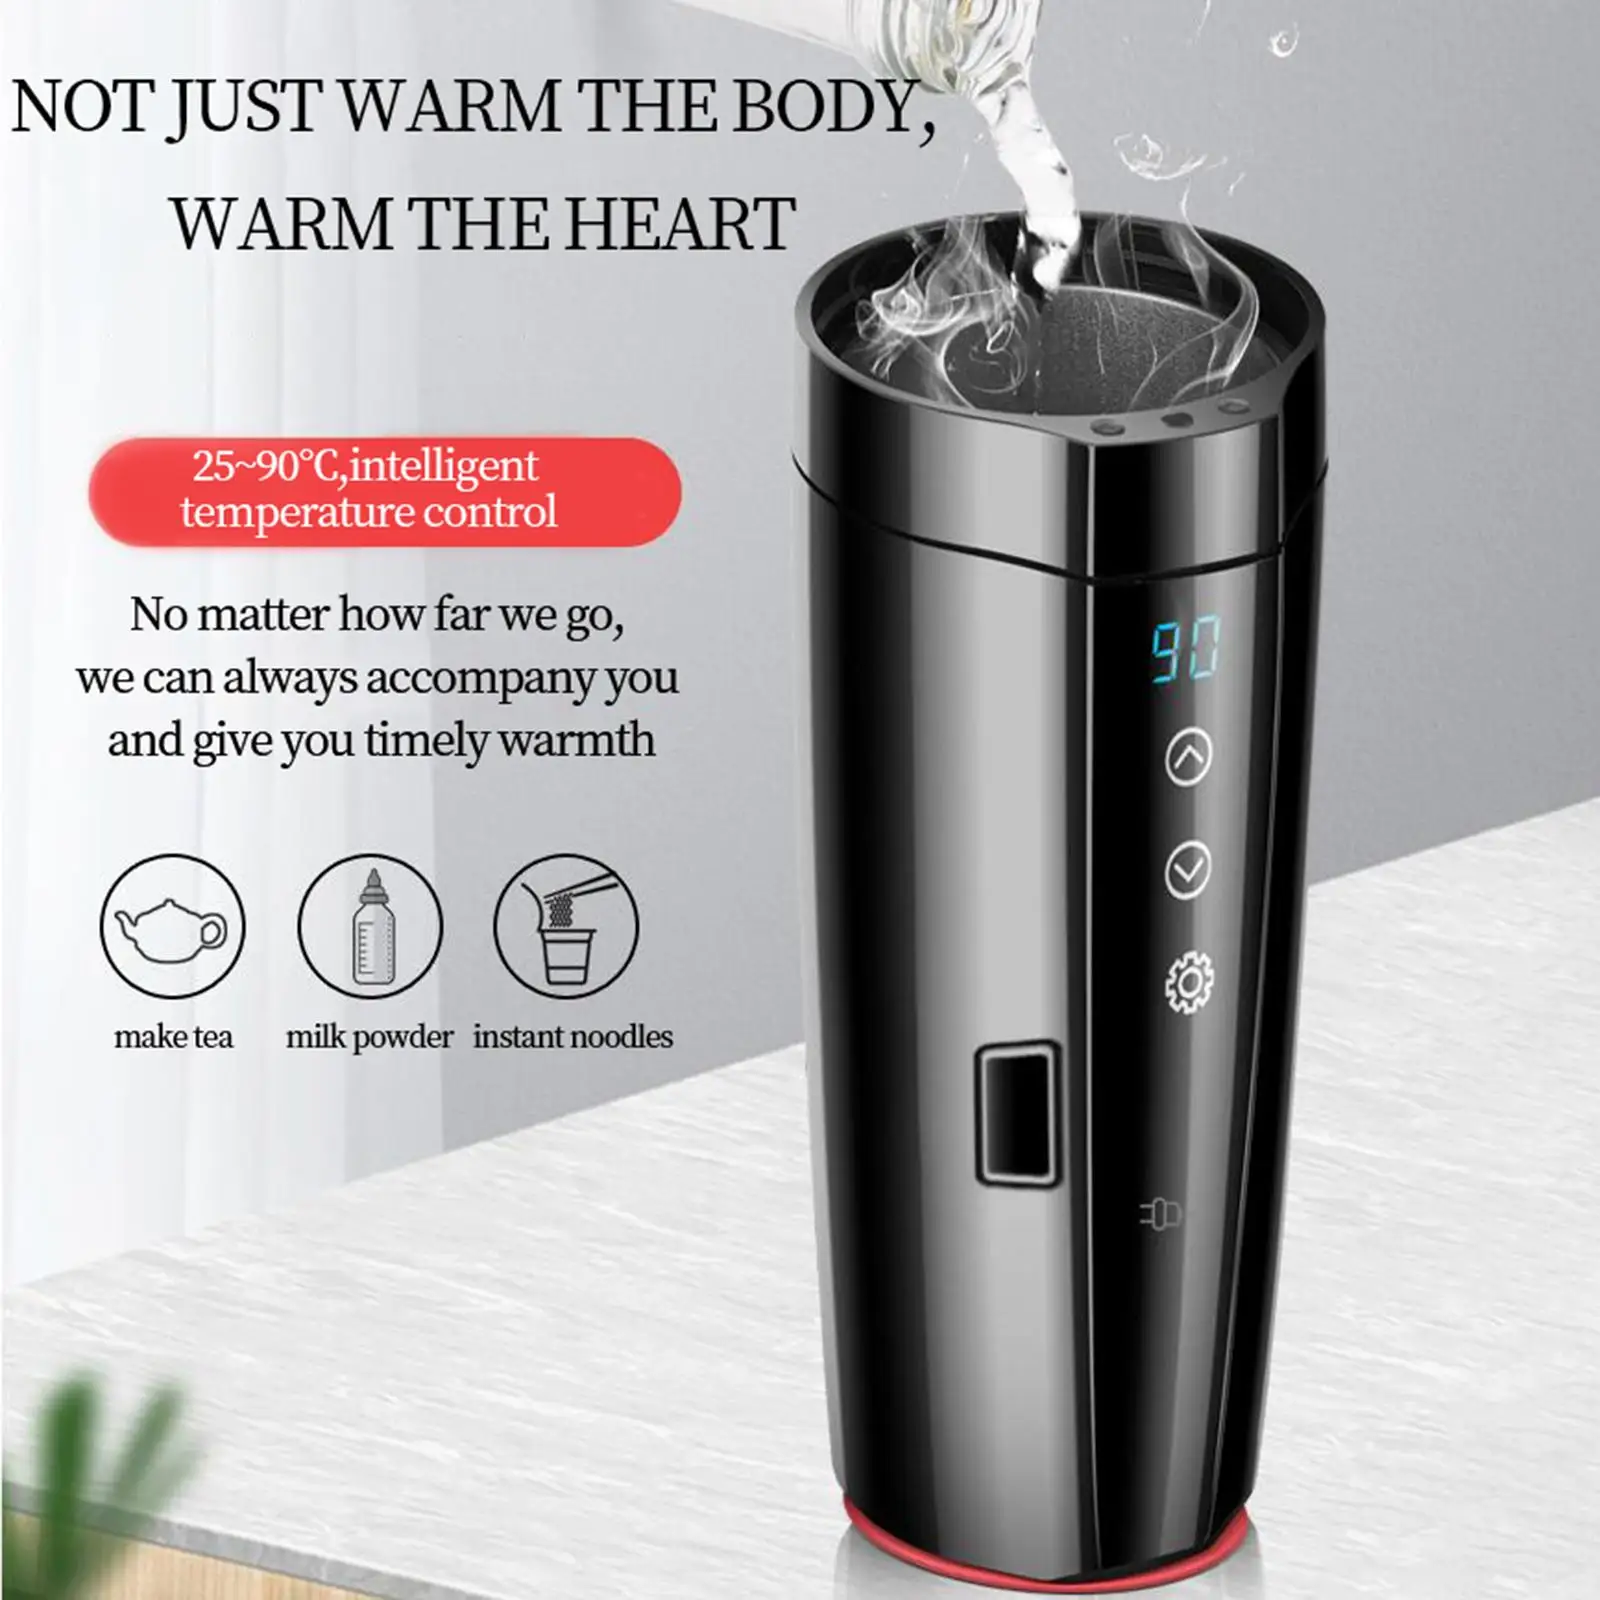 Portable 12V/24V Car Kettle Boiler Temperature Display 400ml Hot Water Kettle Mug Insulated Cup for Tea Coffee Milk Camping